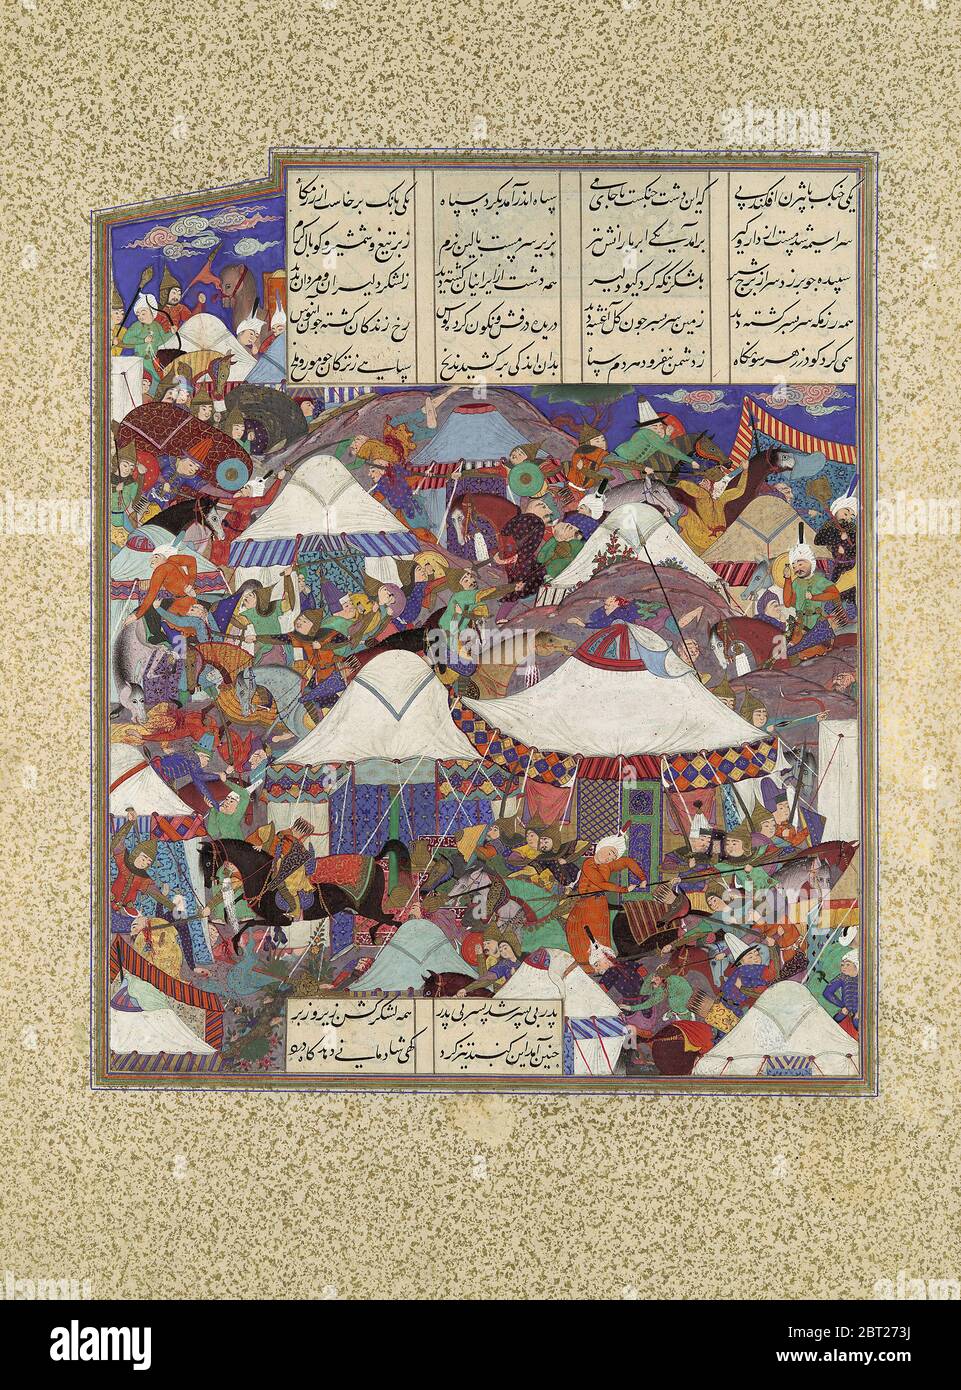 The Besotted Iranian Camp Attacked by Night, Folio 241r from the Shahnama (Book of Kings) of Shah Tahmasp, ca. 1525-30. Stock Photo